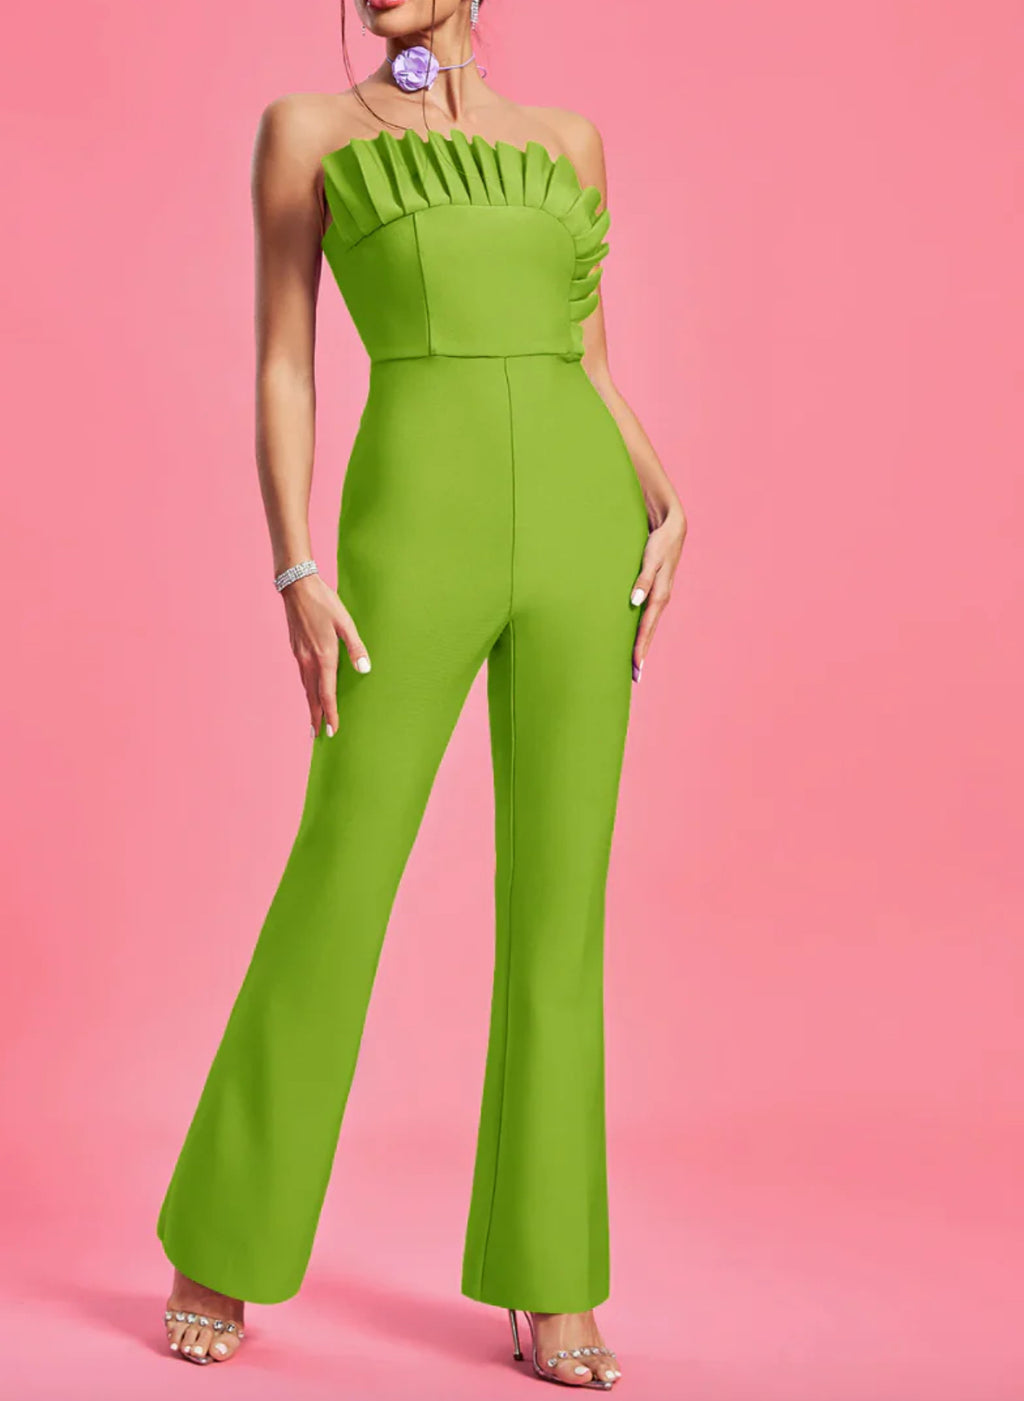 NEXT DAY DELIVERY SUE Strapless Pleated Bandge Jumpsuit